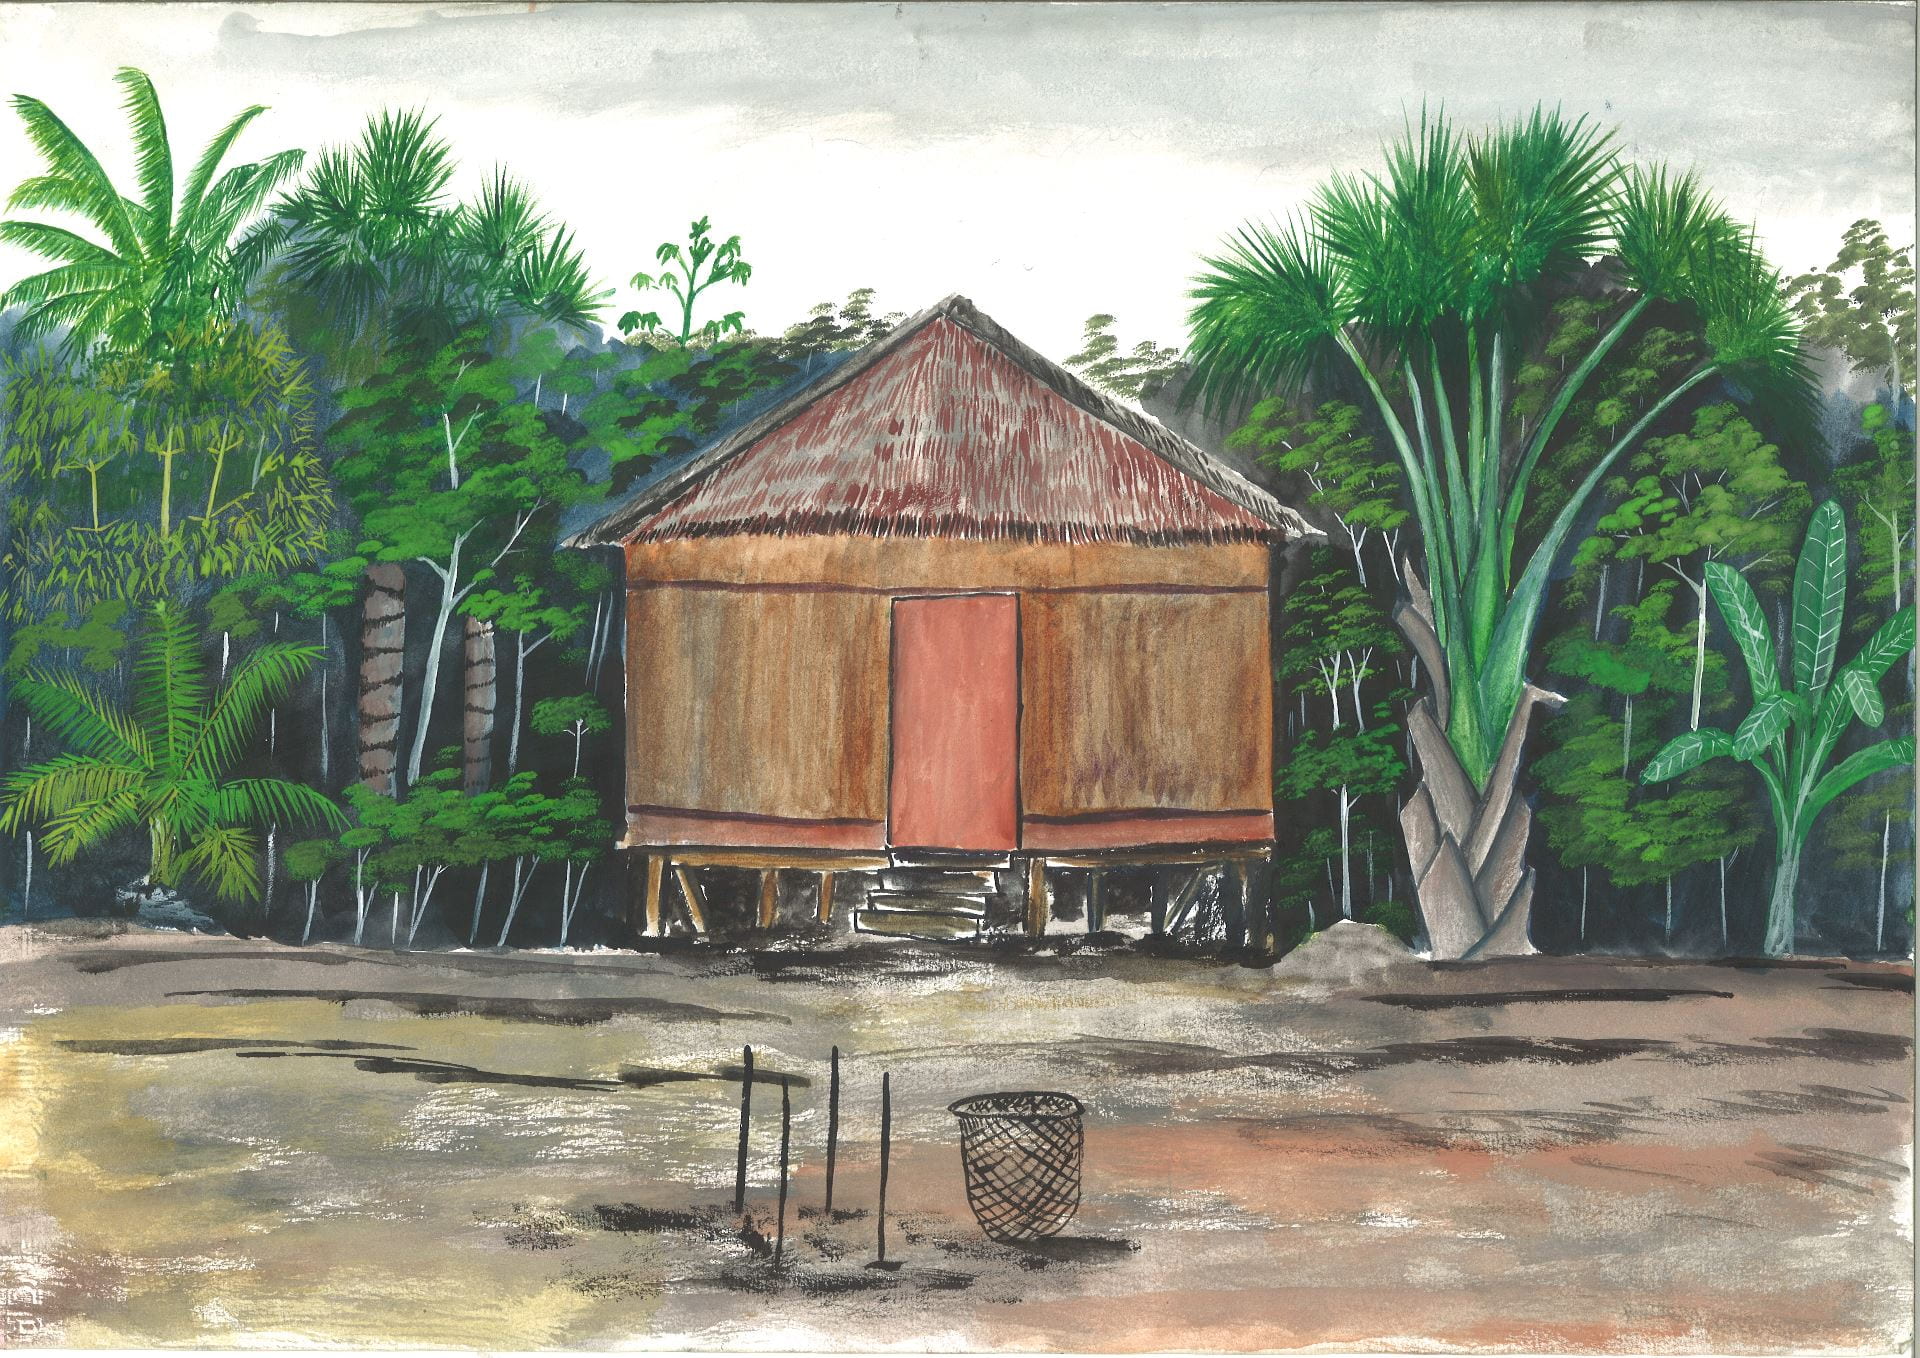 An illustration of a house built on a raised platform in the middle of the rainforest